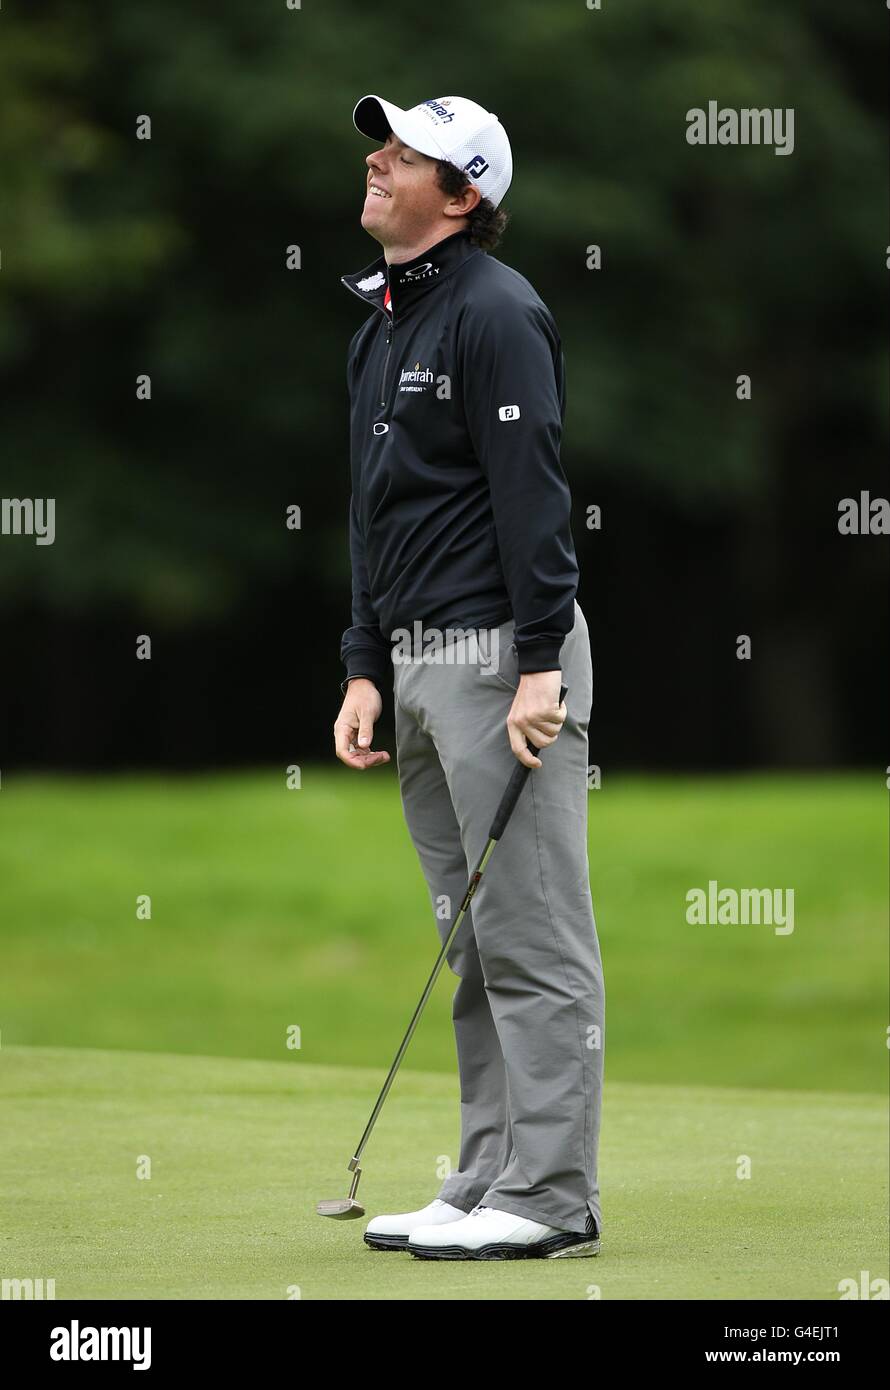 Golf - 2011 Irish Open - Day One - Killarney Golf and Fishing Club. Northern Ireland's Rory McIlroy shows his dejection during The first round of The Irish Open Stock Photo